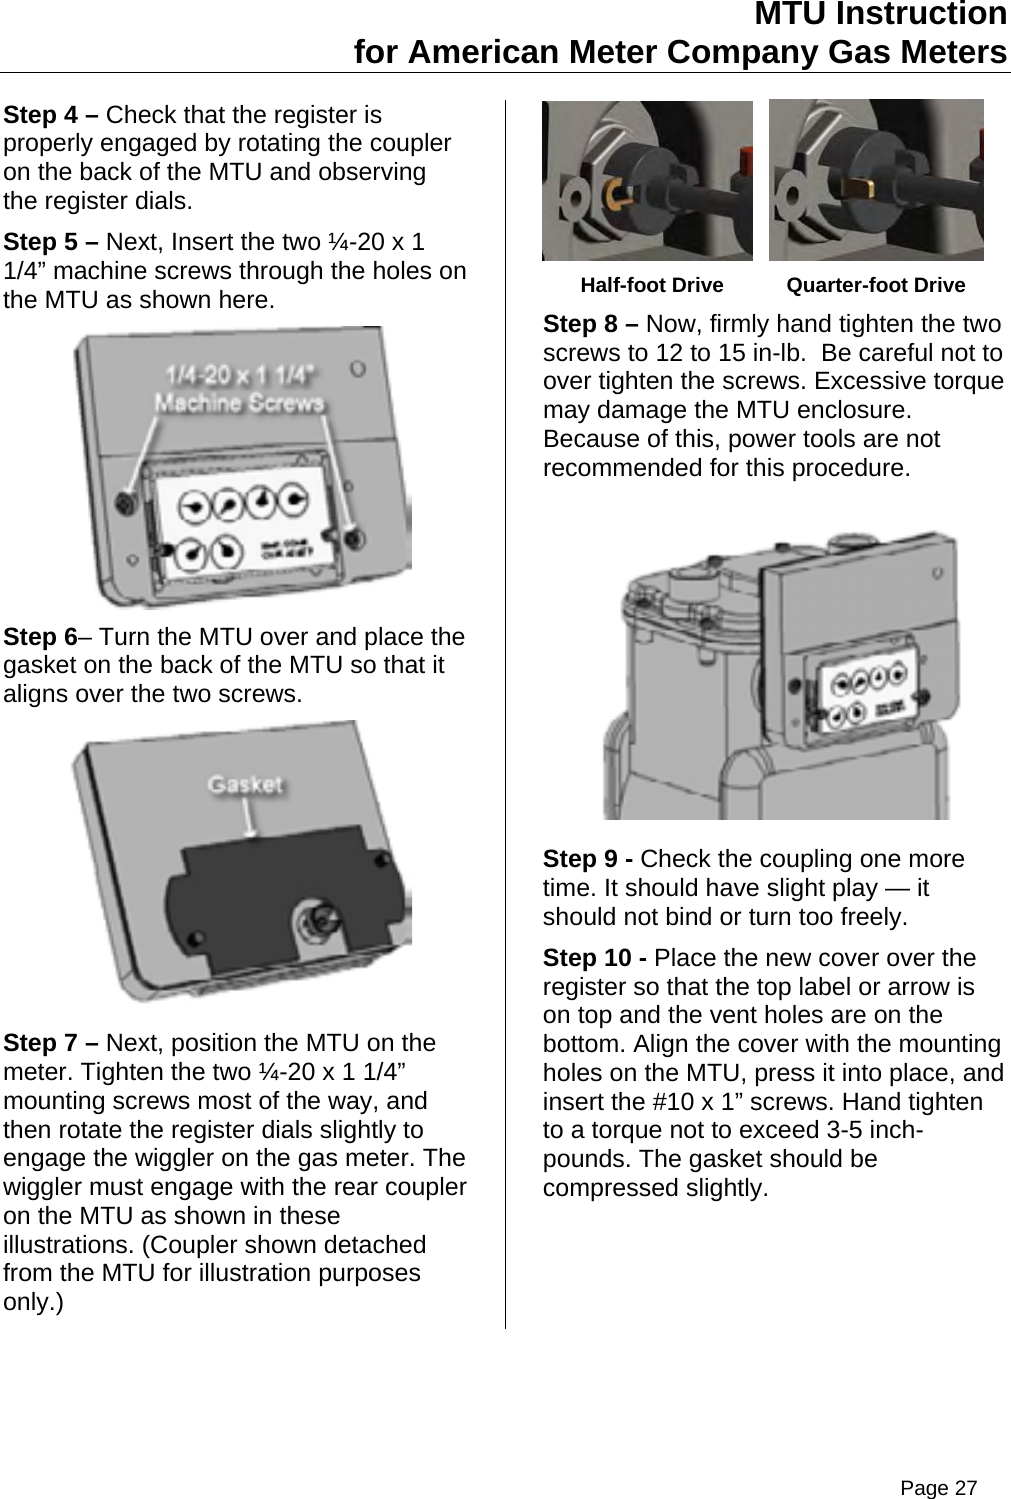 MTU Instruction for American Meter Company Gas Meters Step 4 – Check that the register is properly engaged by rotating the coupler on the back of the MTU and observing the register dials. Step 5 – Next, Insert the two ¼-20 x 1 1/4” machine screws through the holes on the MTU as shown here.  Step 6– Turn the MTU over and place the gasket on the back of the MTU so that it aligns over the two screws.  Step 7 – Next, position the MTU on the meter. Tighten the two ¼-20 x 1 1/4” mounting screws most of the way, and then rotate the register dials slightly to engage the wiggler on the gas meter. The wiggler must engage with the rear coupler on the MTU as shown in these illustrations. (Coupler shown detached from the MTU for illustration purposes only.)       Half-foot Drive  Quarter-foot Drive Step 8 – Now, firmly hand tighten the two screws to 12 to 15 in-lb.  Be careful not to over tighten the screws. Excessive torque may damage the MTU enclosure.   Because of this, power tools are not recommended for this procedure.  Step 9 - Check the coupling one more time. It should have slight play — it should not bind or turn too freely. Step 10 - Place the new cover over the register so that the top label or arrow is on top and the vent holes are on the bottom. Align the cover with the mounting holes on the MTU, press it into place, and insert the #10 x 1” screws. Hand tighten to a torque not to exceed 3-5 inch-pounds. The gasket should be compressed slightly. Page 27